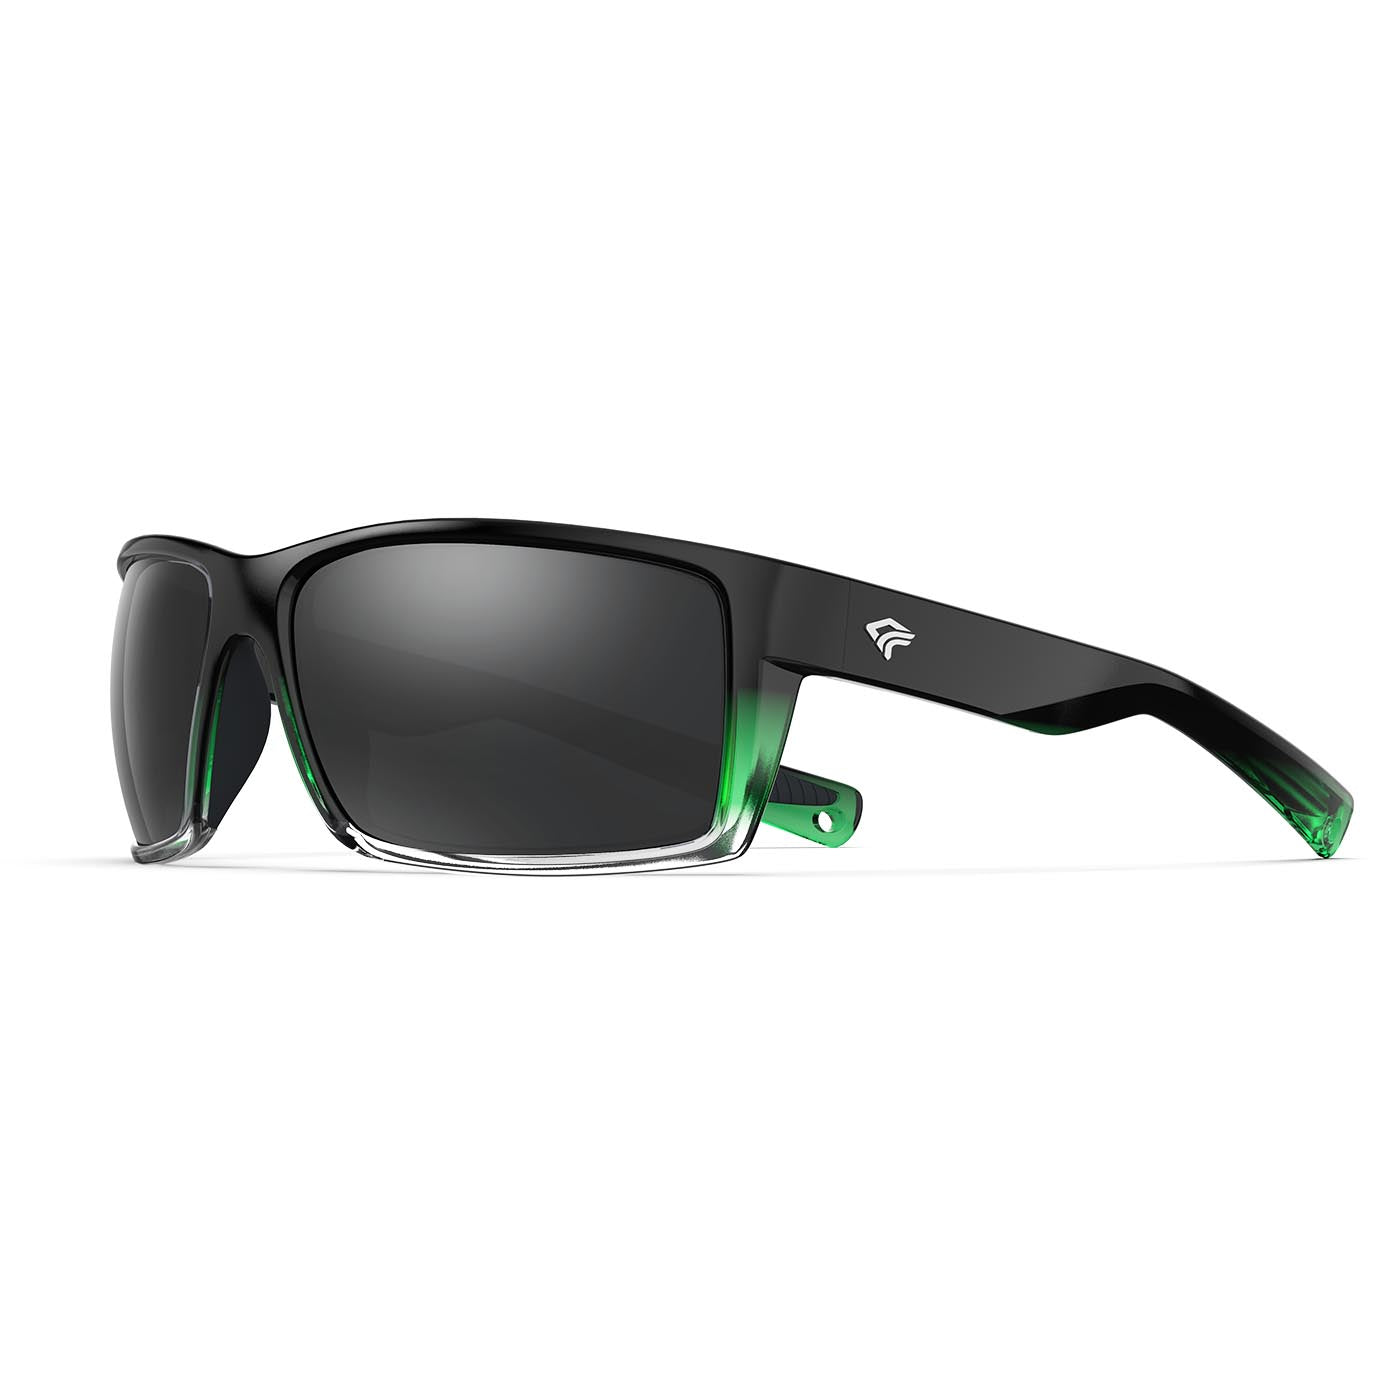 Tolerates Polarized Sports Sunglasses for Men and Women With